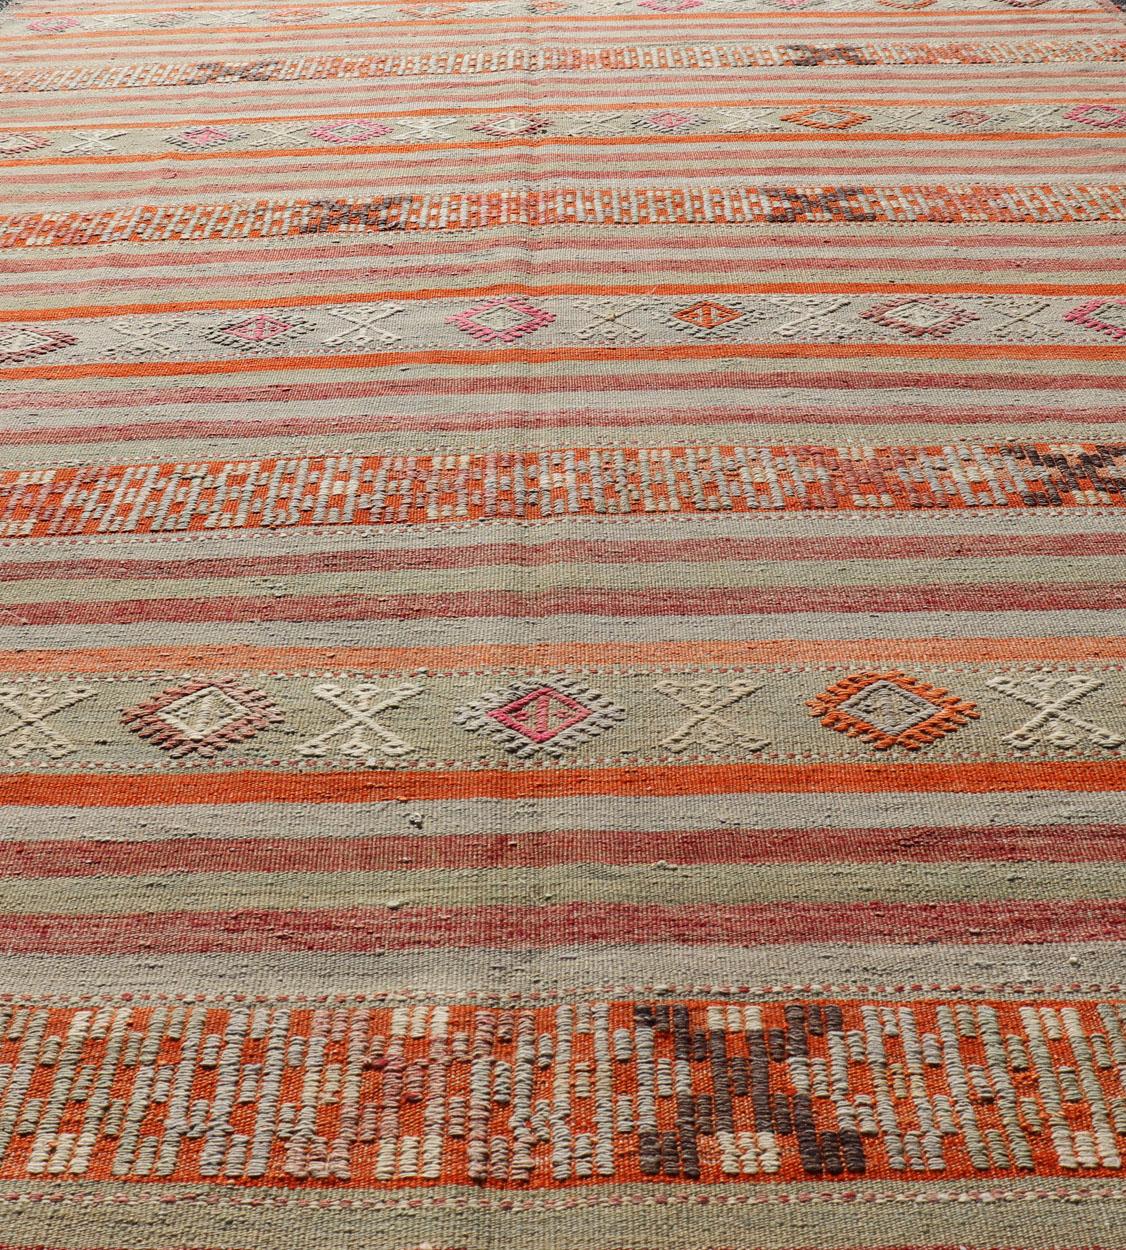 Vintage Turkish Kilim with Colorful Stripes in Orange, Lt. green, red & gray  For Sale 4